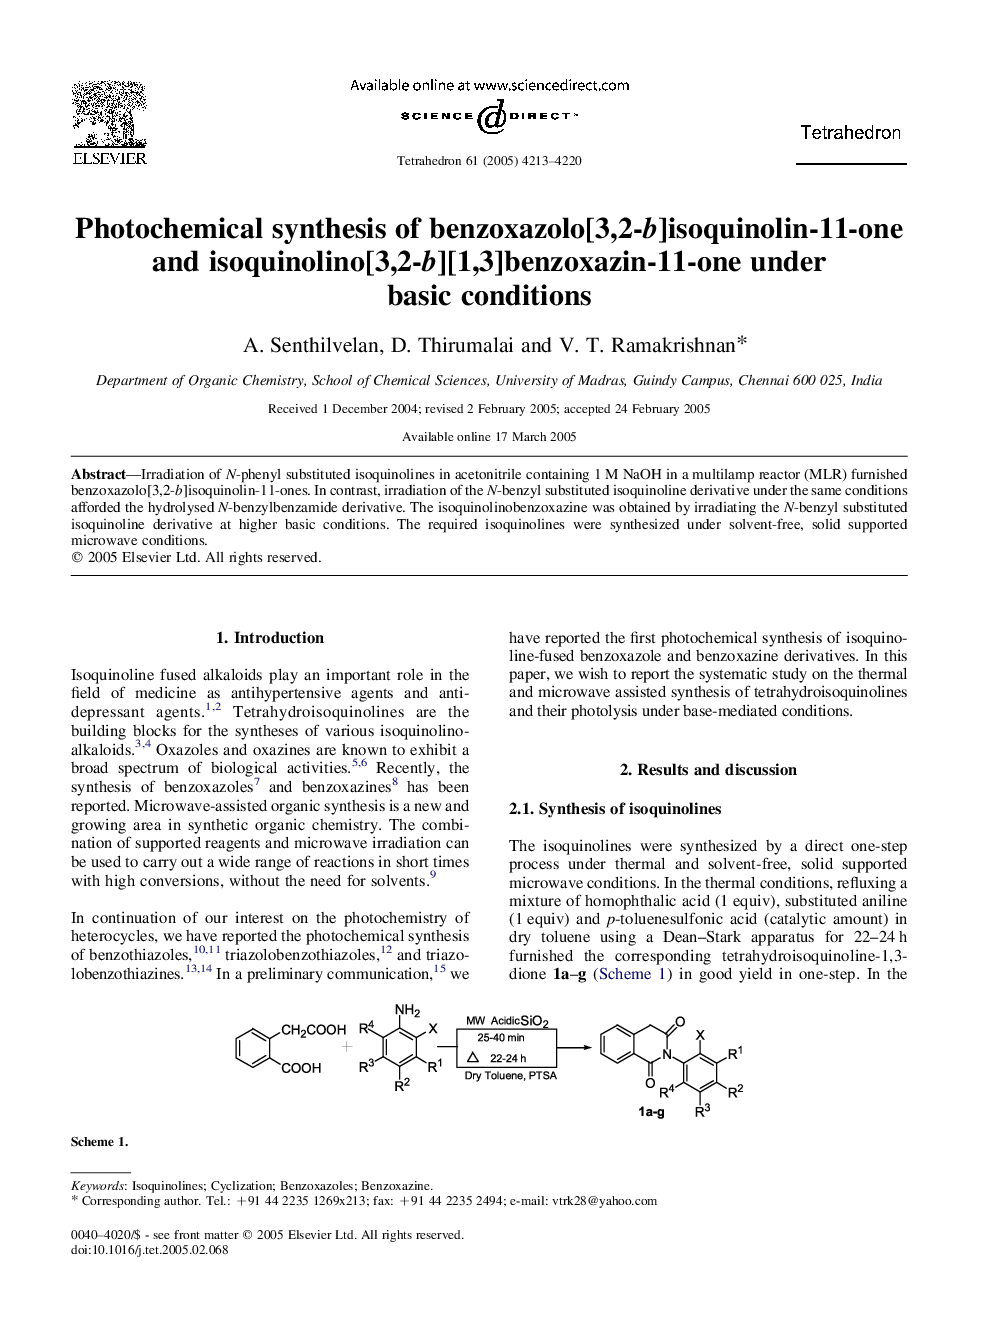 Photochemical synthesis of benzoxazolo[3,2-b]isoquinolin-11-one and isoquinolino[3,2-b][1,3]benzoxazin-11-one under basic conditions